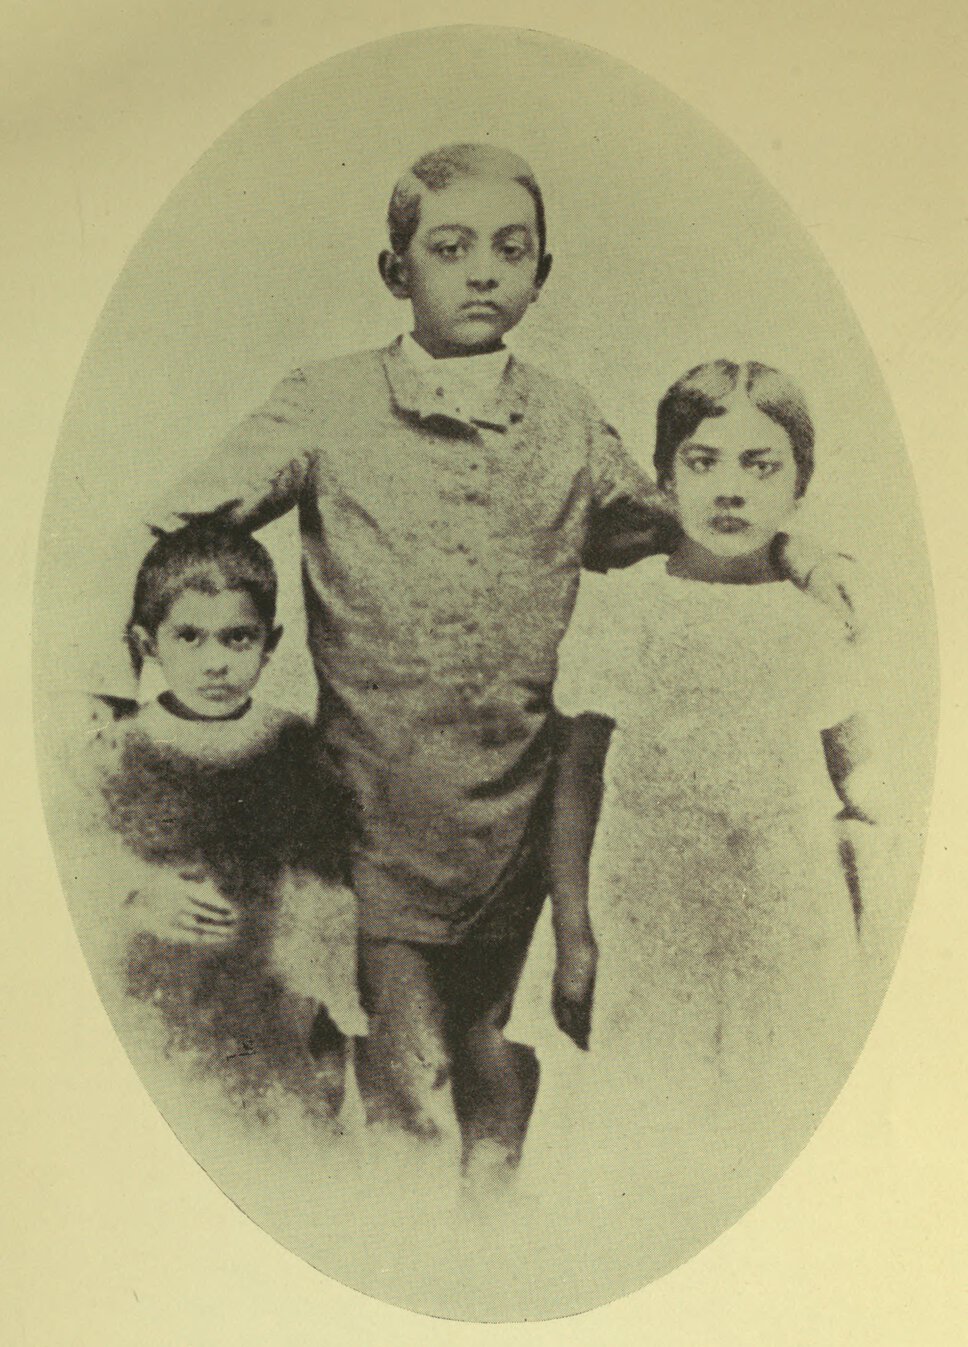 Toru, Abju, and Aru Dutt standing, facing forward, with arms around one another.